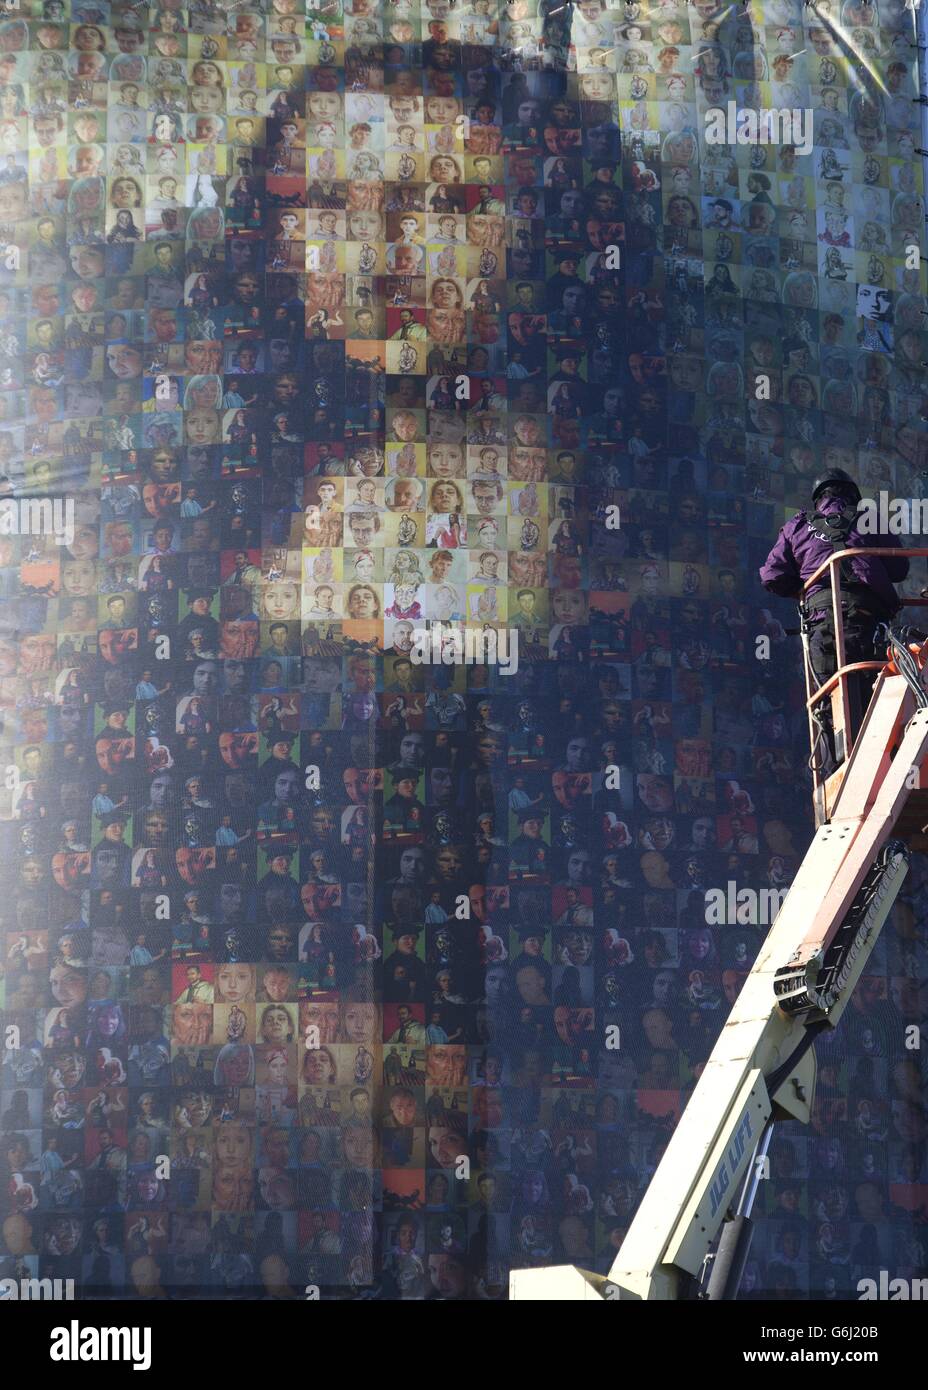 : A 14 metre high easel displaying a five metre by seven metre canvas of the Mona Lisa, created by using 83 individual self-portraits submitted by shortlisted entrants, is displayed on Clapham Common in south London, to mark the launch of Sky Arts' Portrait Artist of the Year competition. Stock Photo